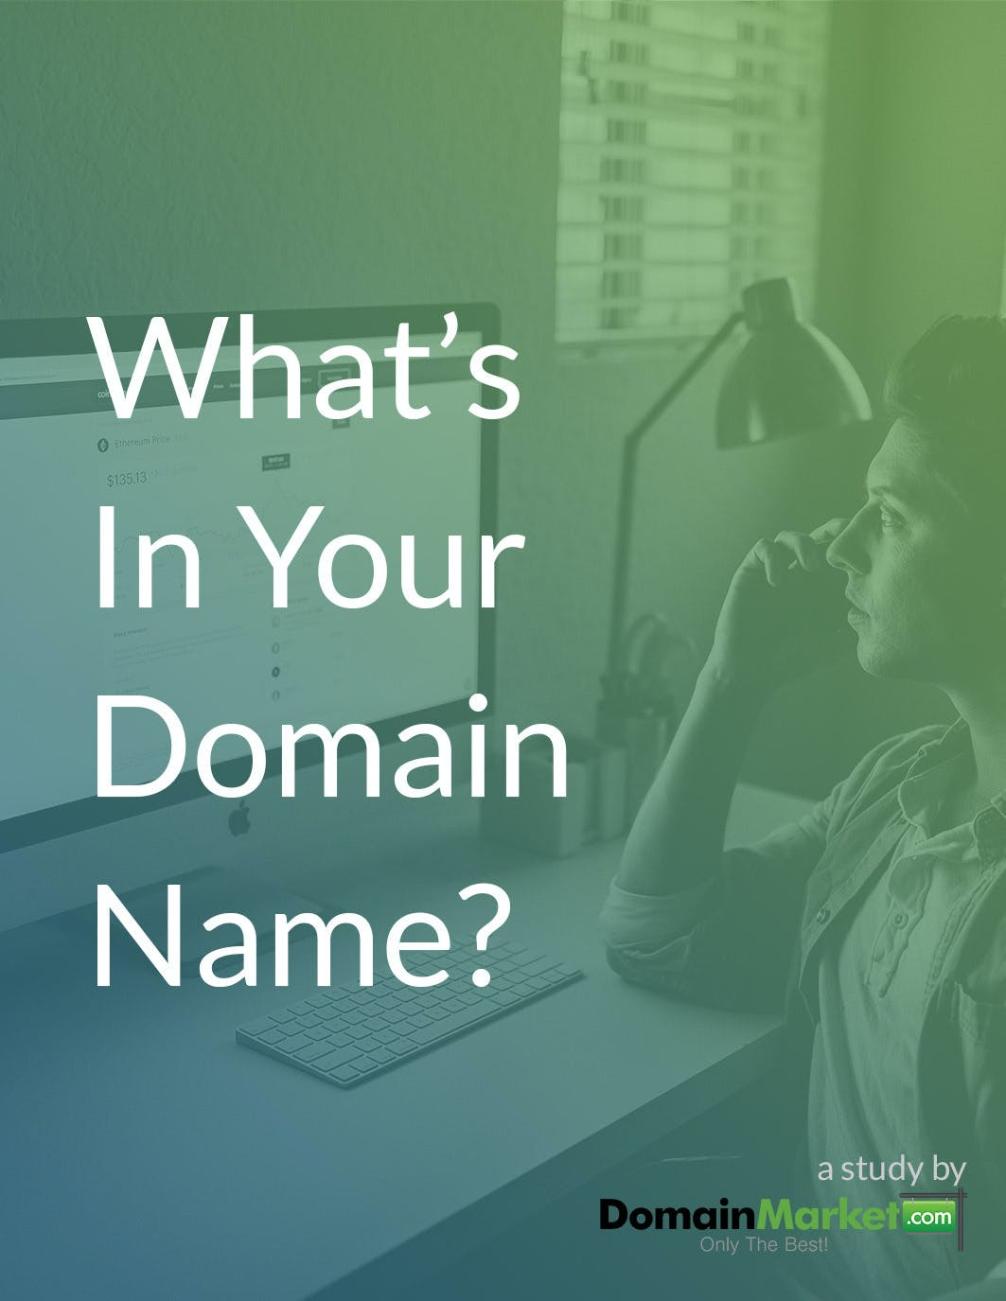 How Can Vests Domain Name Sales Impact A Nurse's Career?